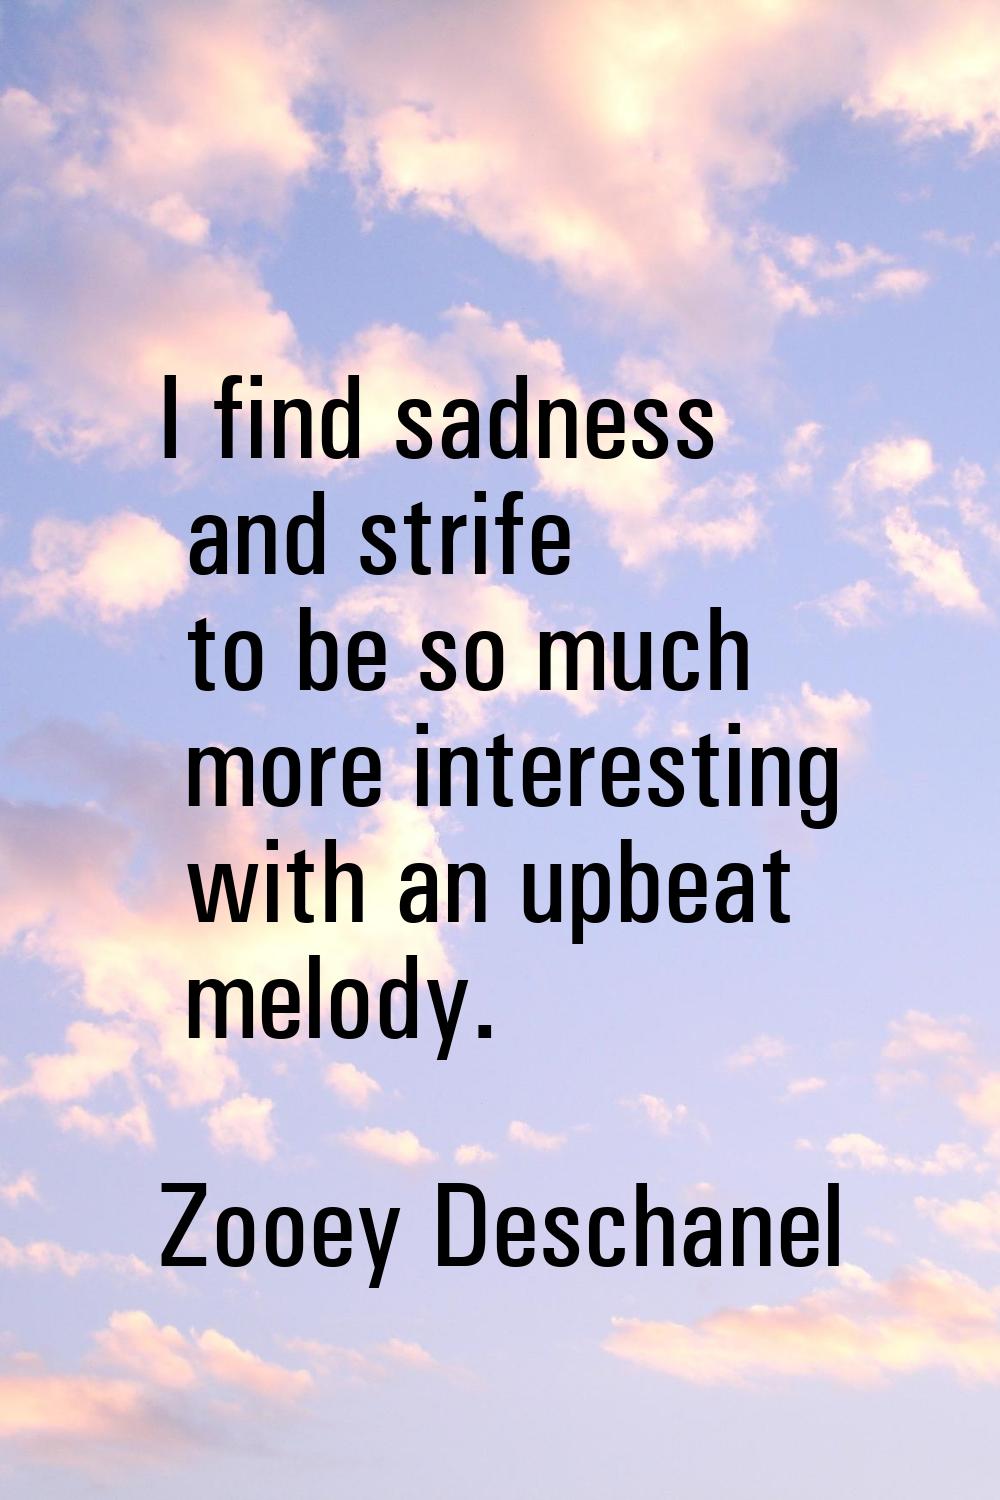 I find sadness and strife to be so much more interesting with an upbeat melody.